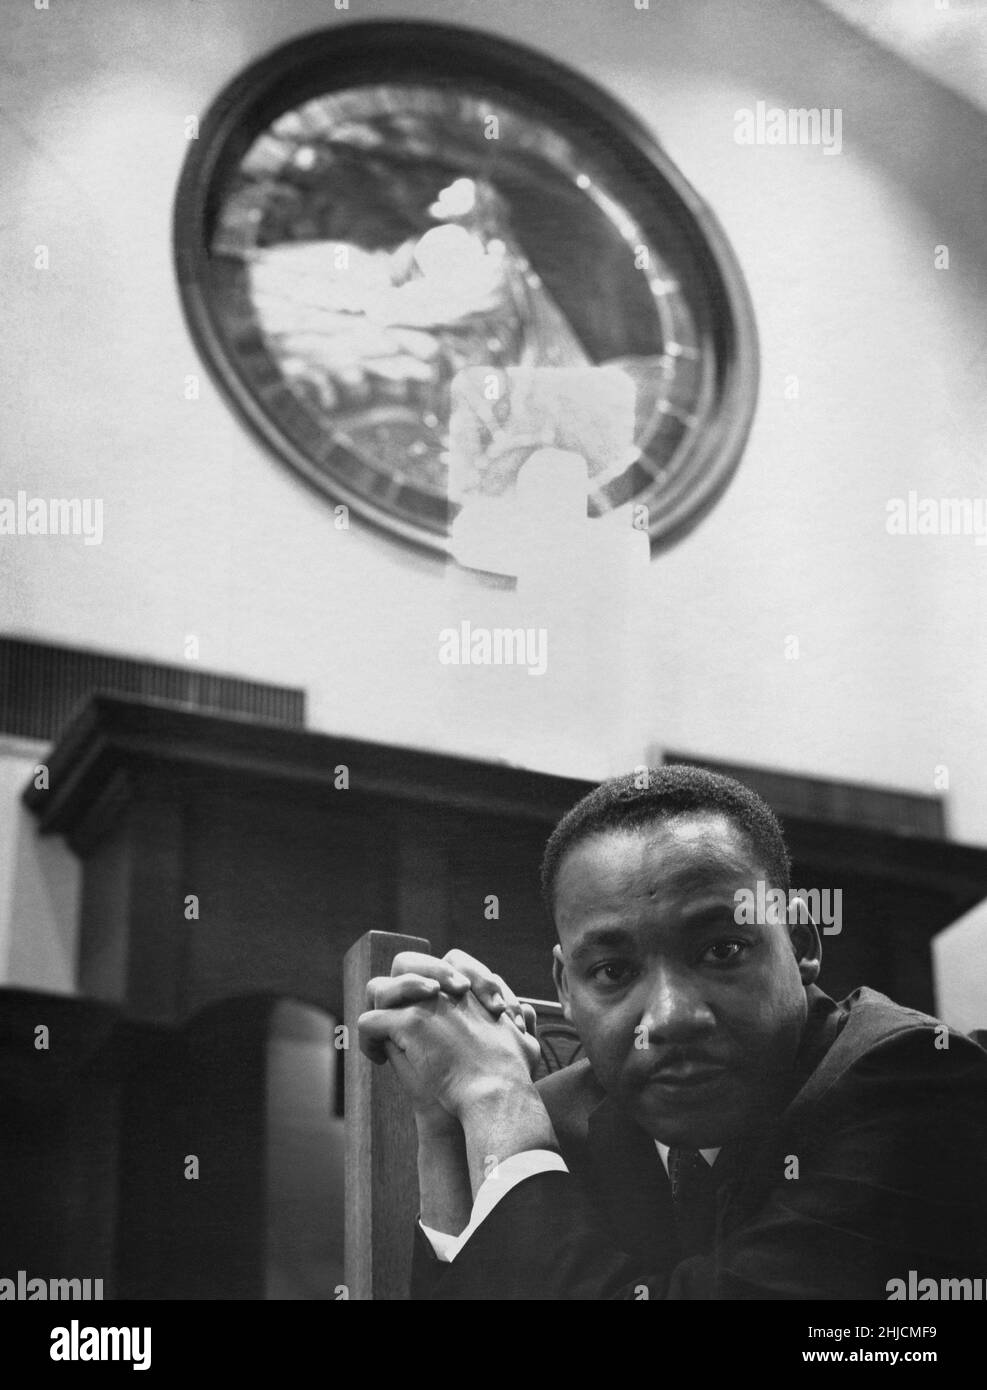 Martin Luther King, Jr. in a church in Atlanta, Georgia, 1968. Martin Luther King, Jr. (January 15, 1929 ‚Äì April 4, 1968) was an American clergyman, activist, and prominent leader of the civil rights movement. He was assassinated on April 4, 1968 in Memphis, Tennessee. Stock Photo